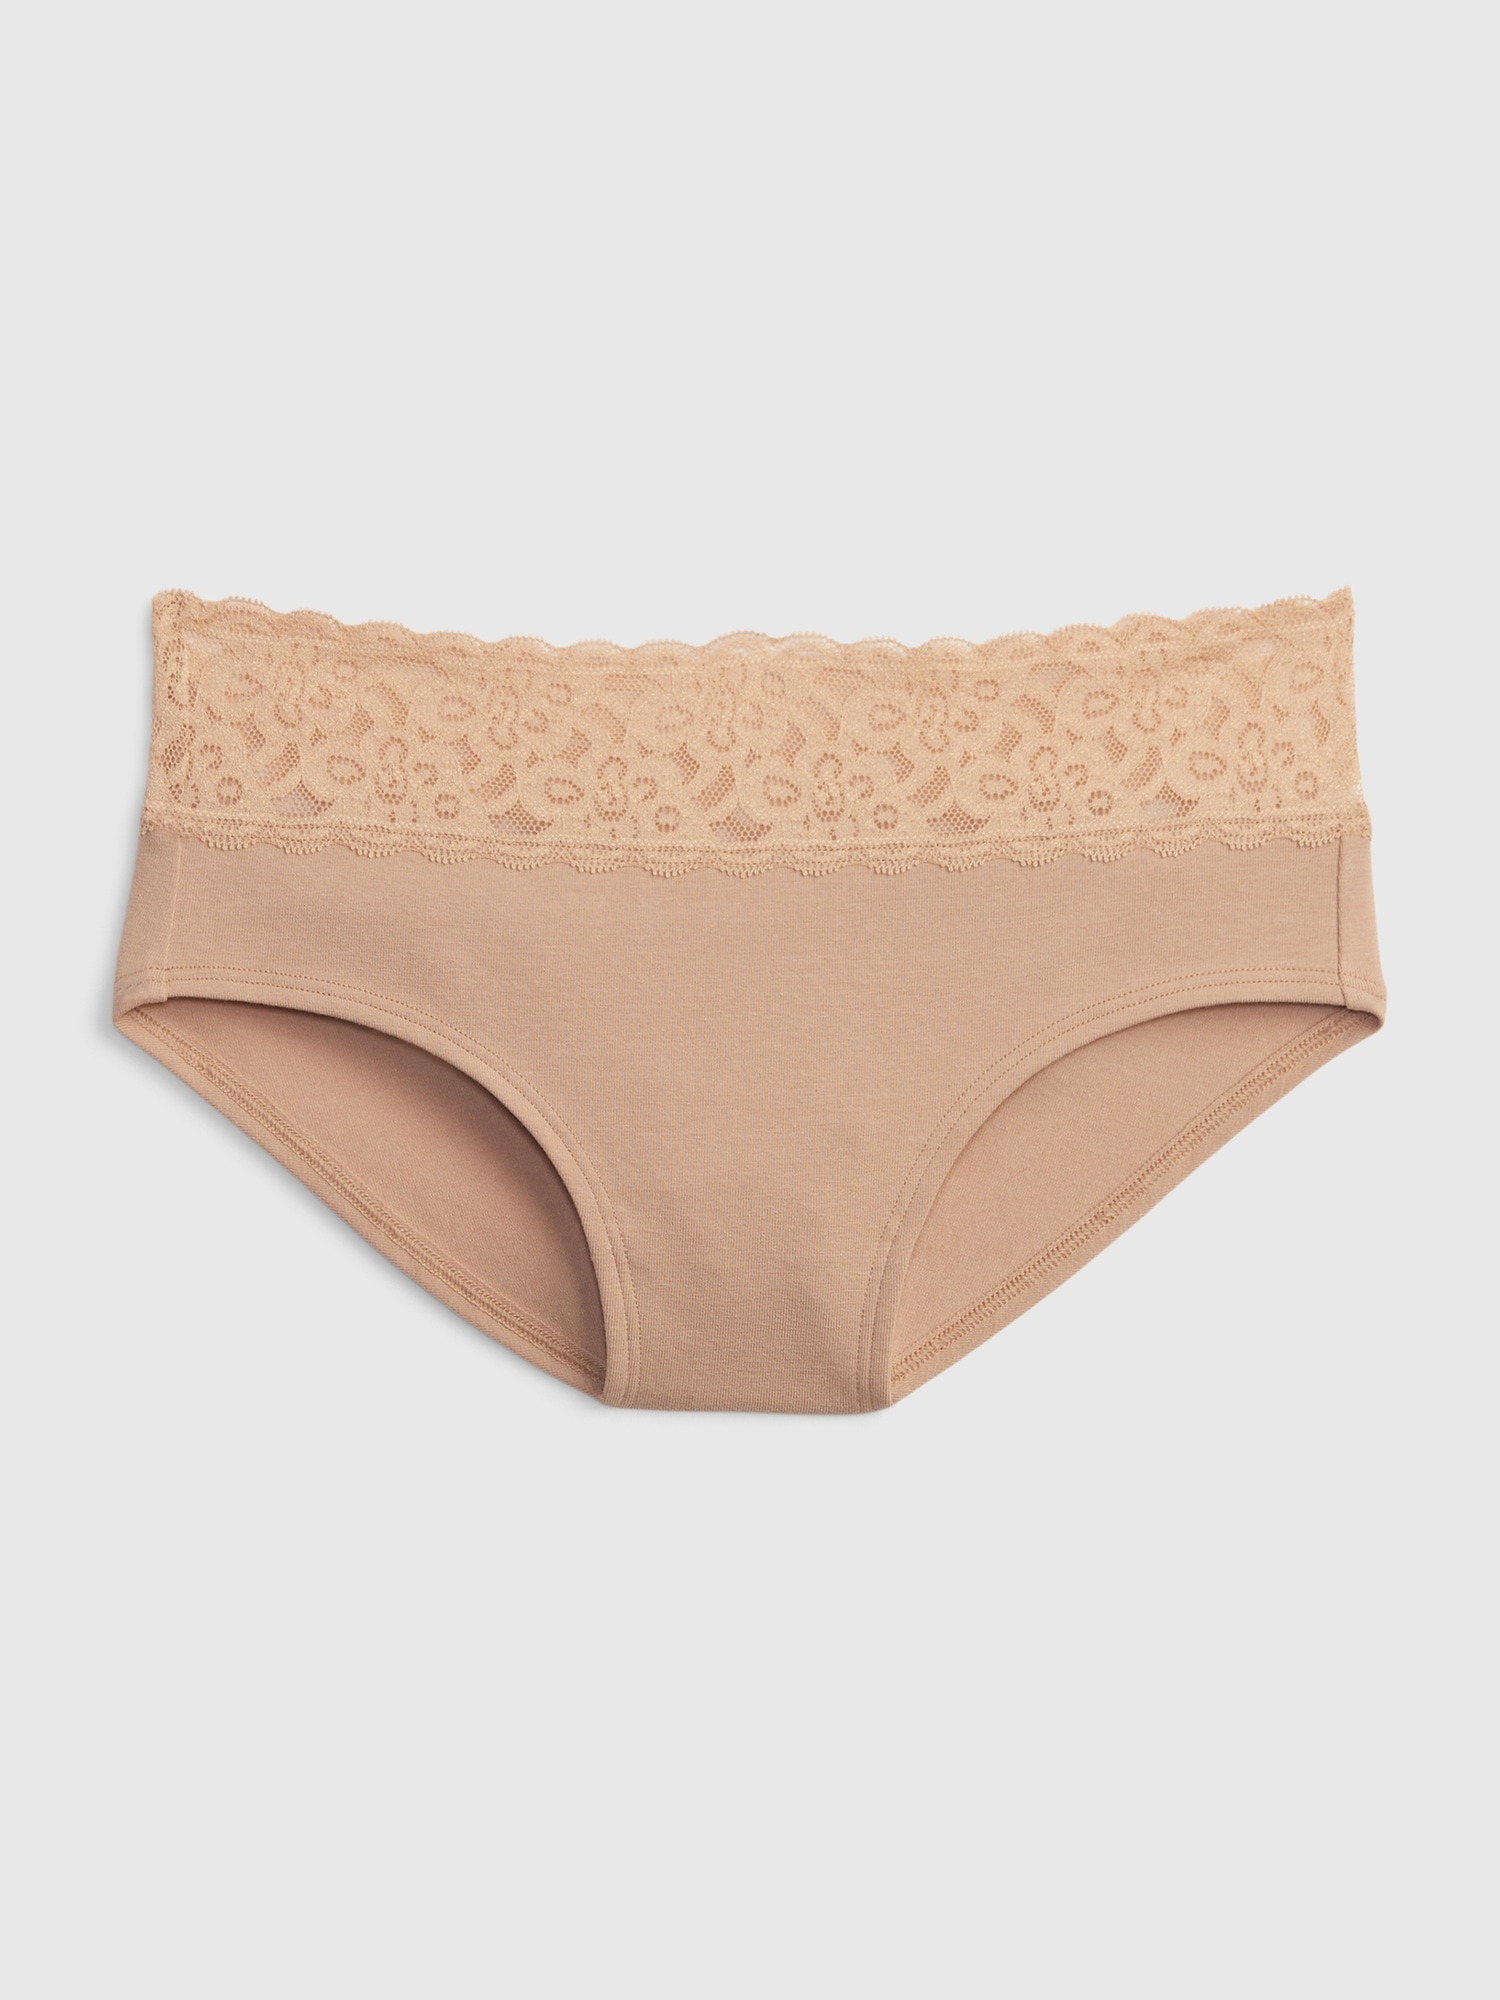 Gap Organic Stretch Cotton Lace Hipster